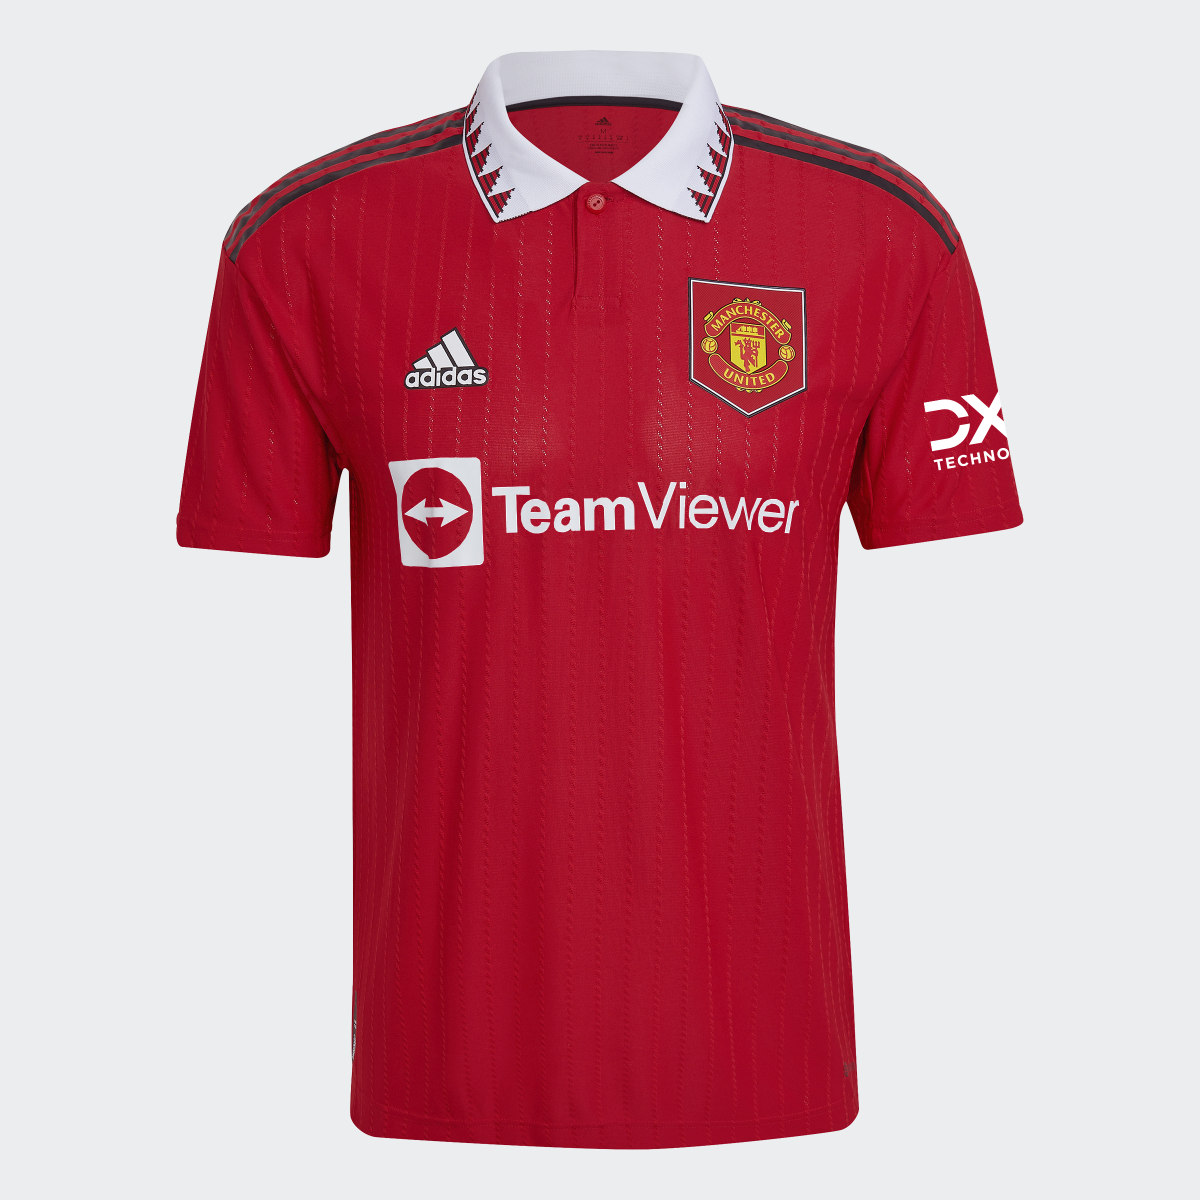 Adidas Manchester United 22/23 Home Jersey. 5